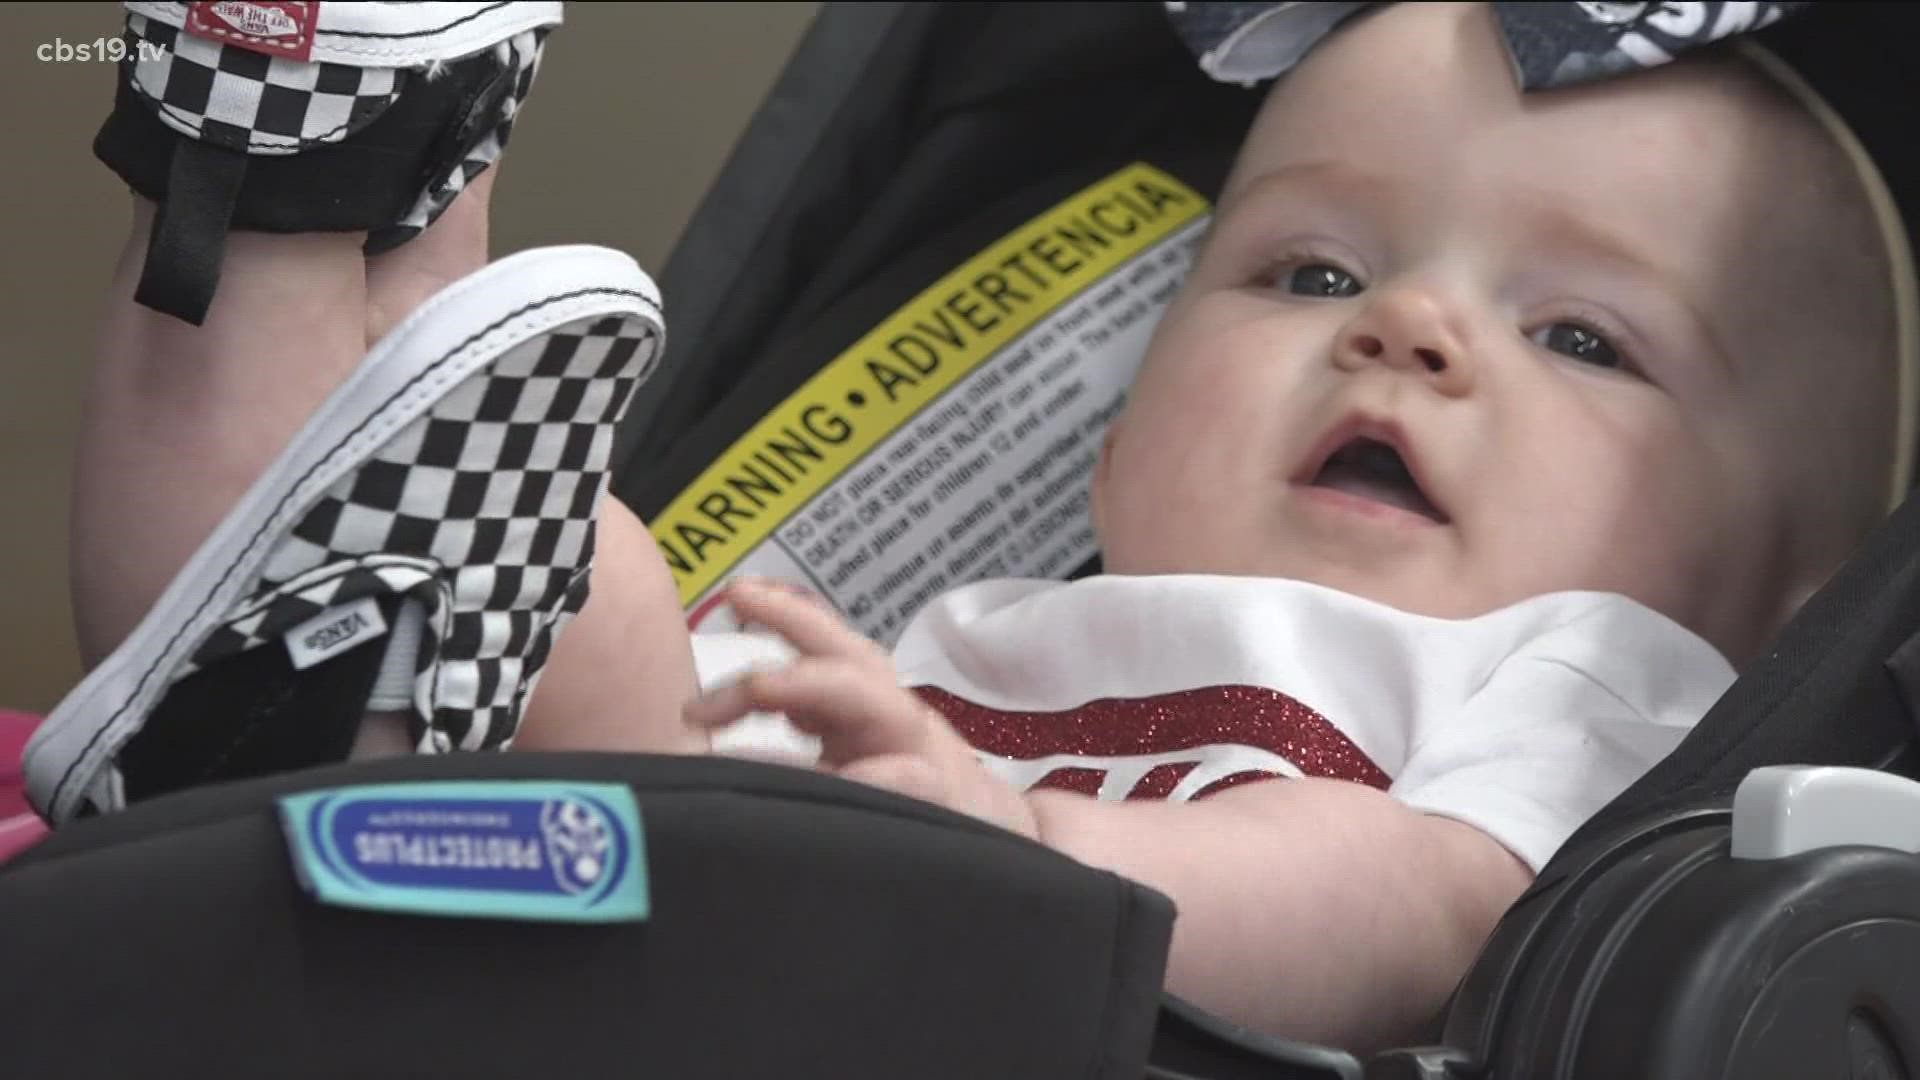 East Texas residents adapt during national baby shortage impacts